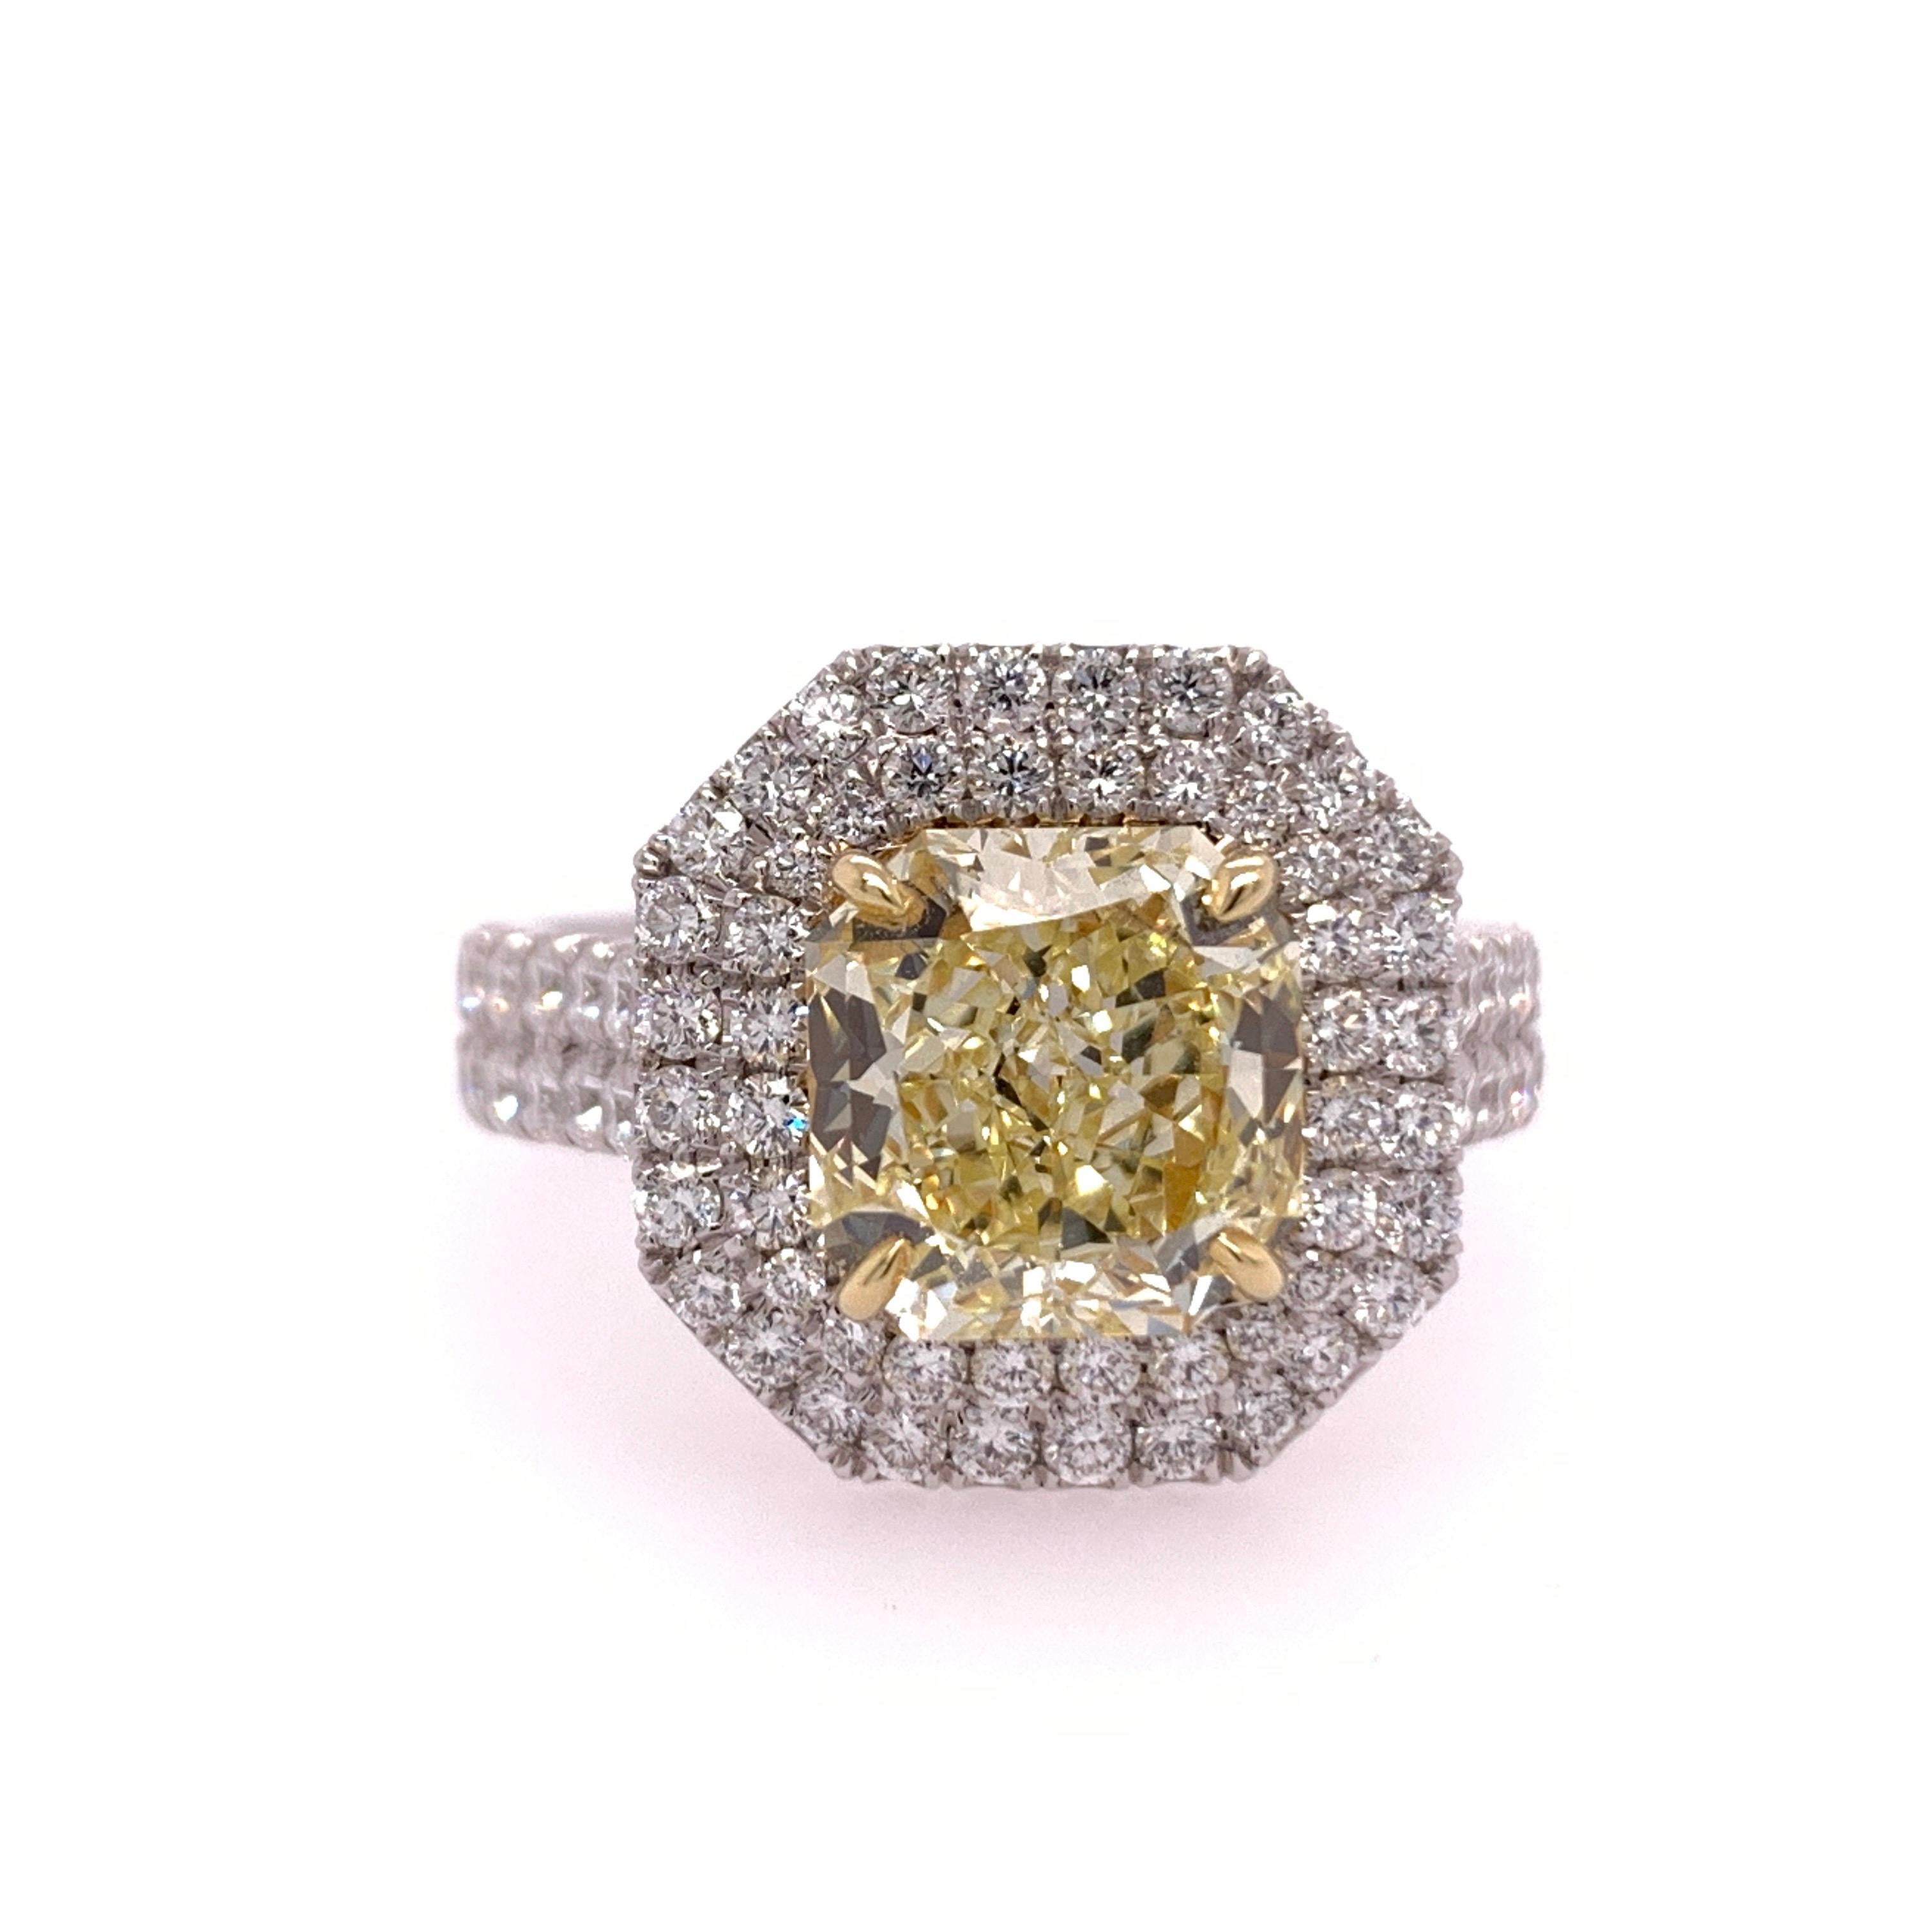 Radiant Cut Internally Flawless GIA Natural Fancy Yellow, the ring is set with 76 Natural Round Brilliant F VS diamonds weighing a total of 1.01 carats. 

Ring size is a 5.75+.

